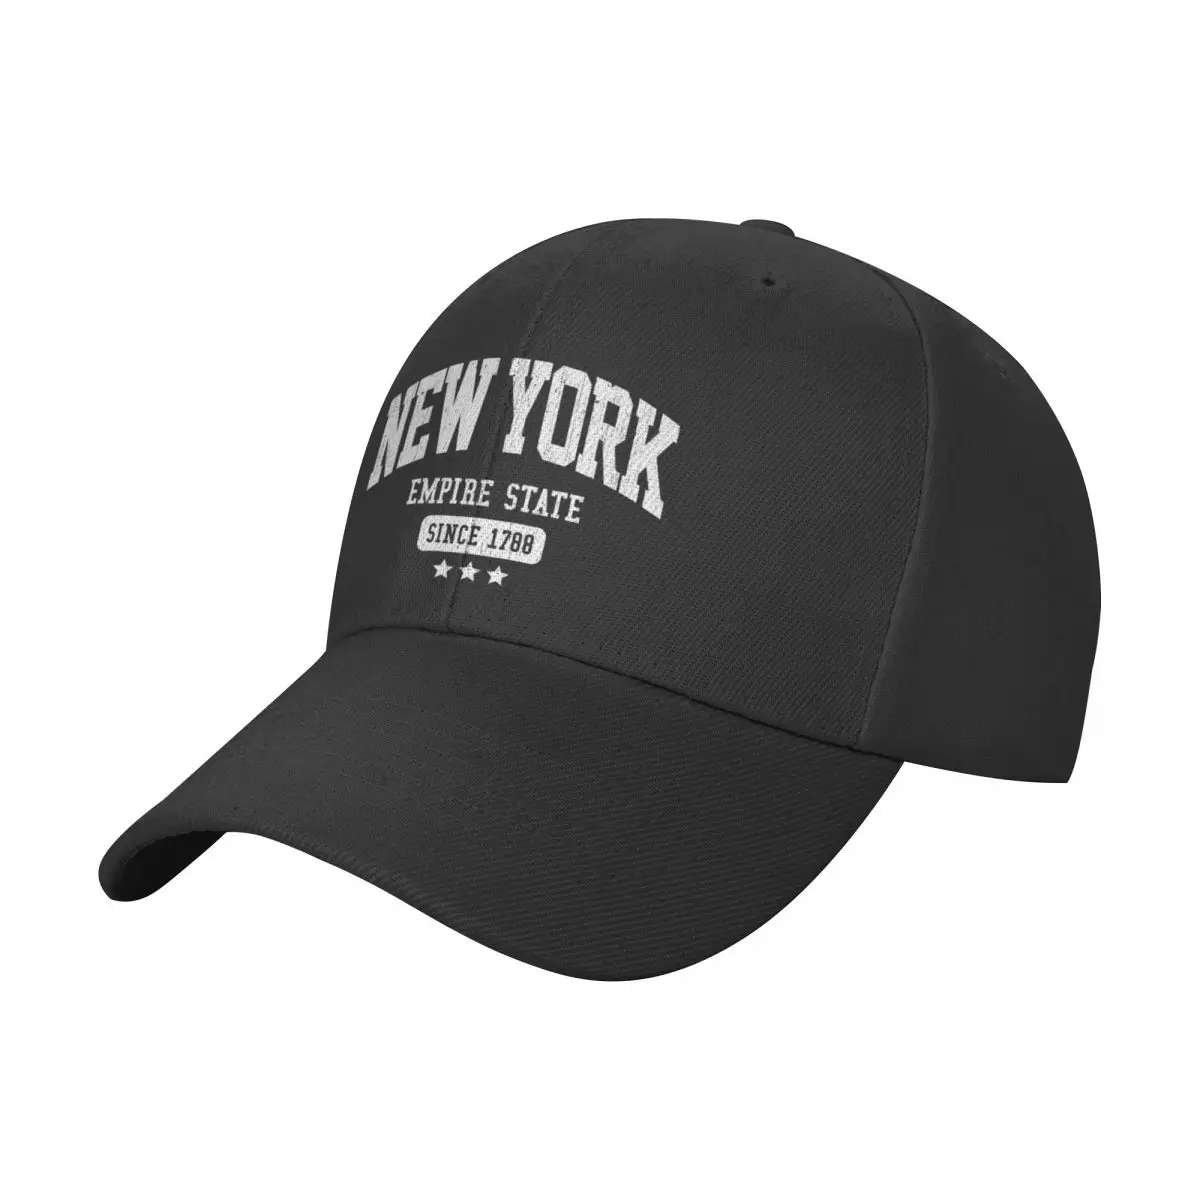 

New York Empire State Since 1788 Vintage Weathered Baseball Cap Military Tactical Cap Rave Male Women's